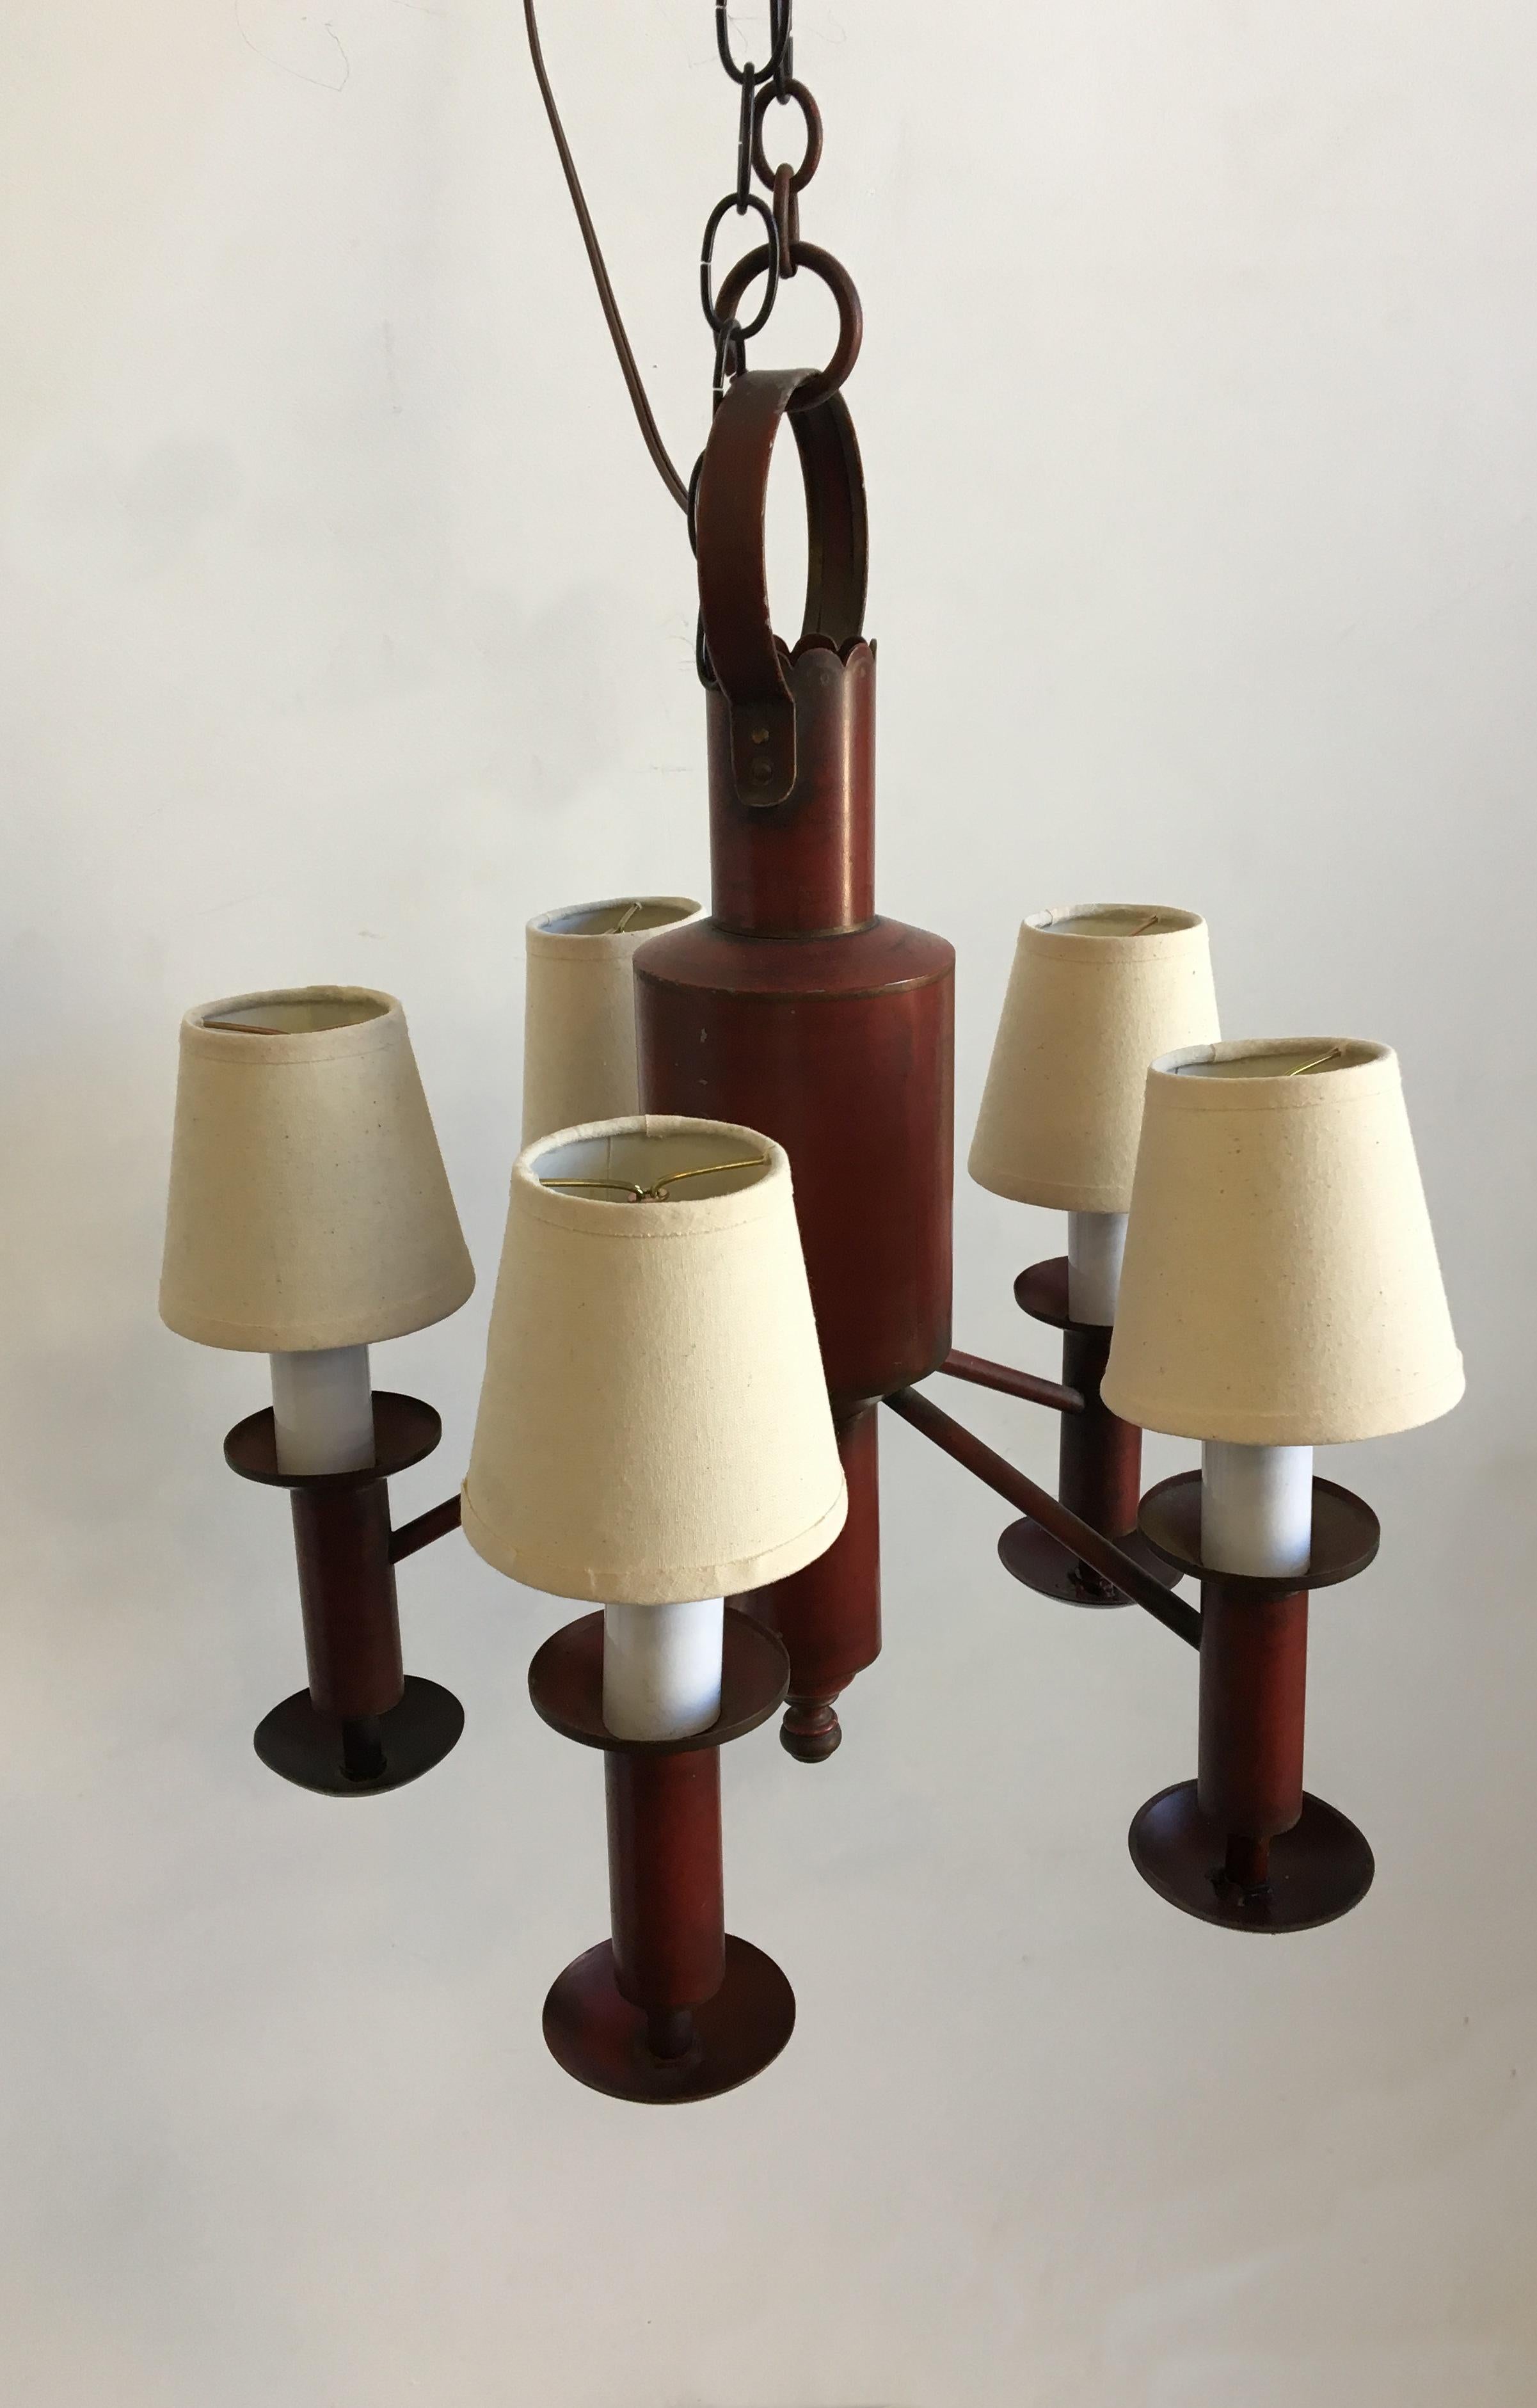 French Metal Rustic Style Five-Arm Candelabra with Shades